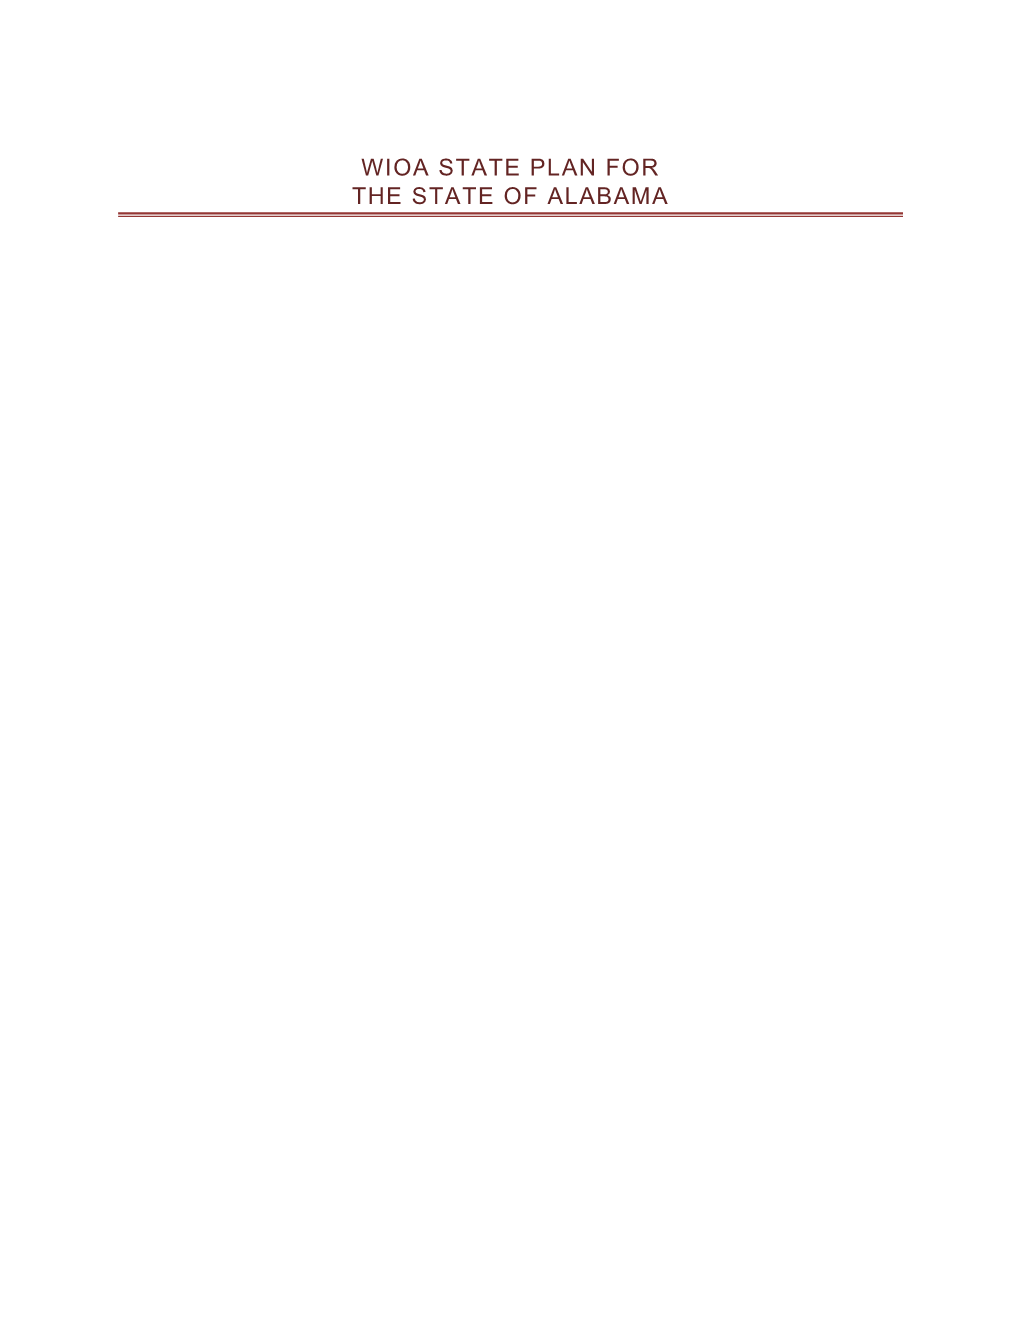 Wioa State Plan for the State of Alabama